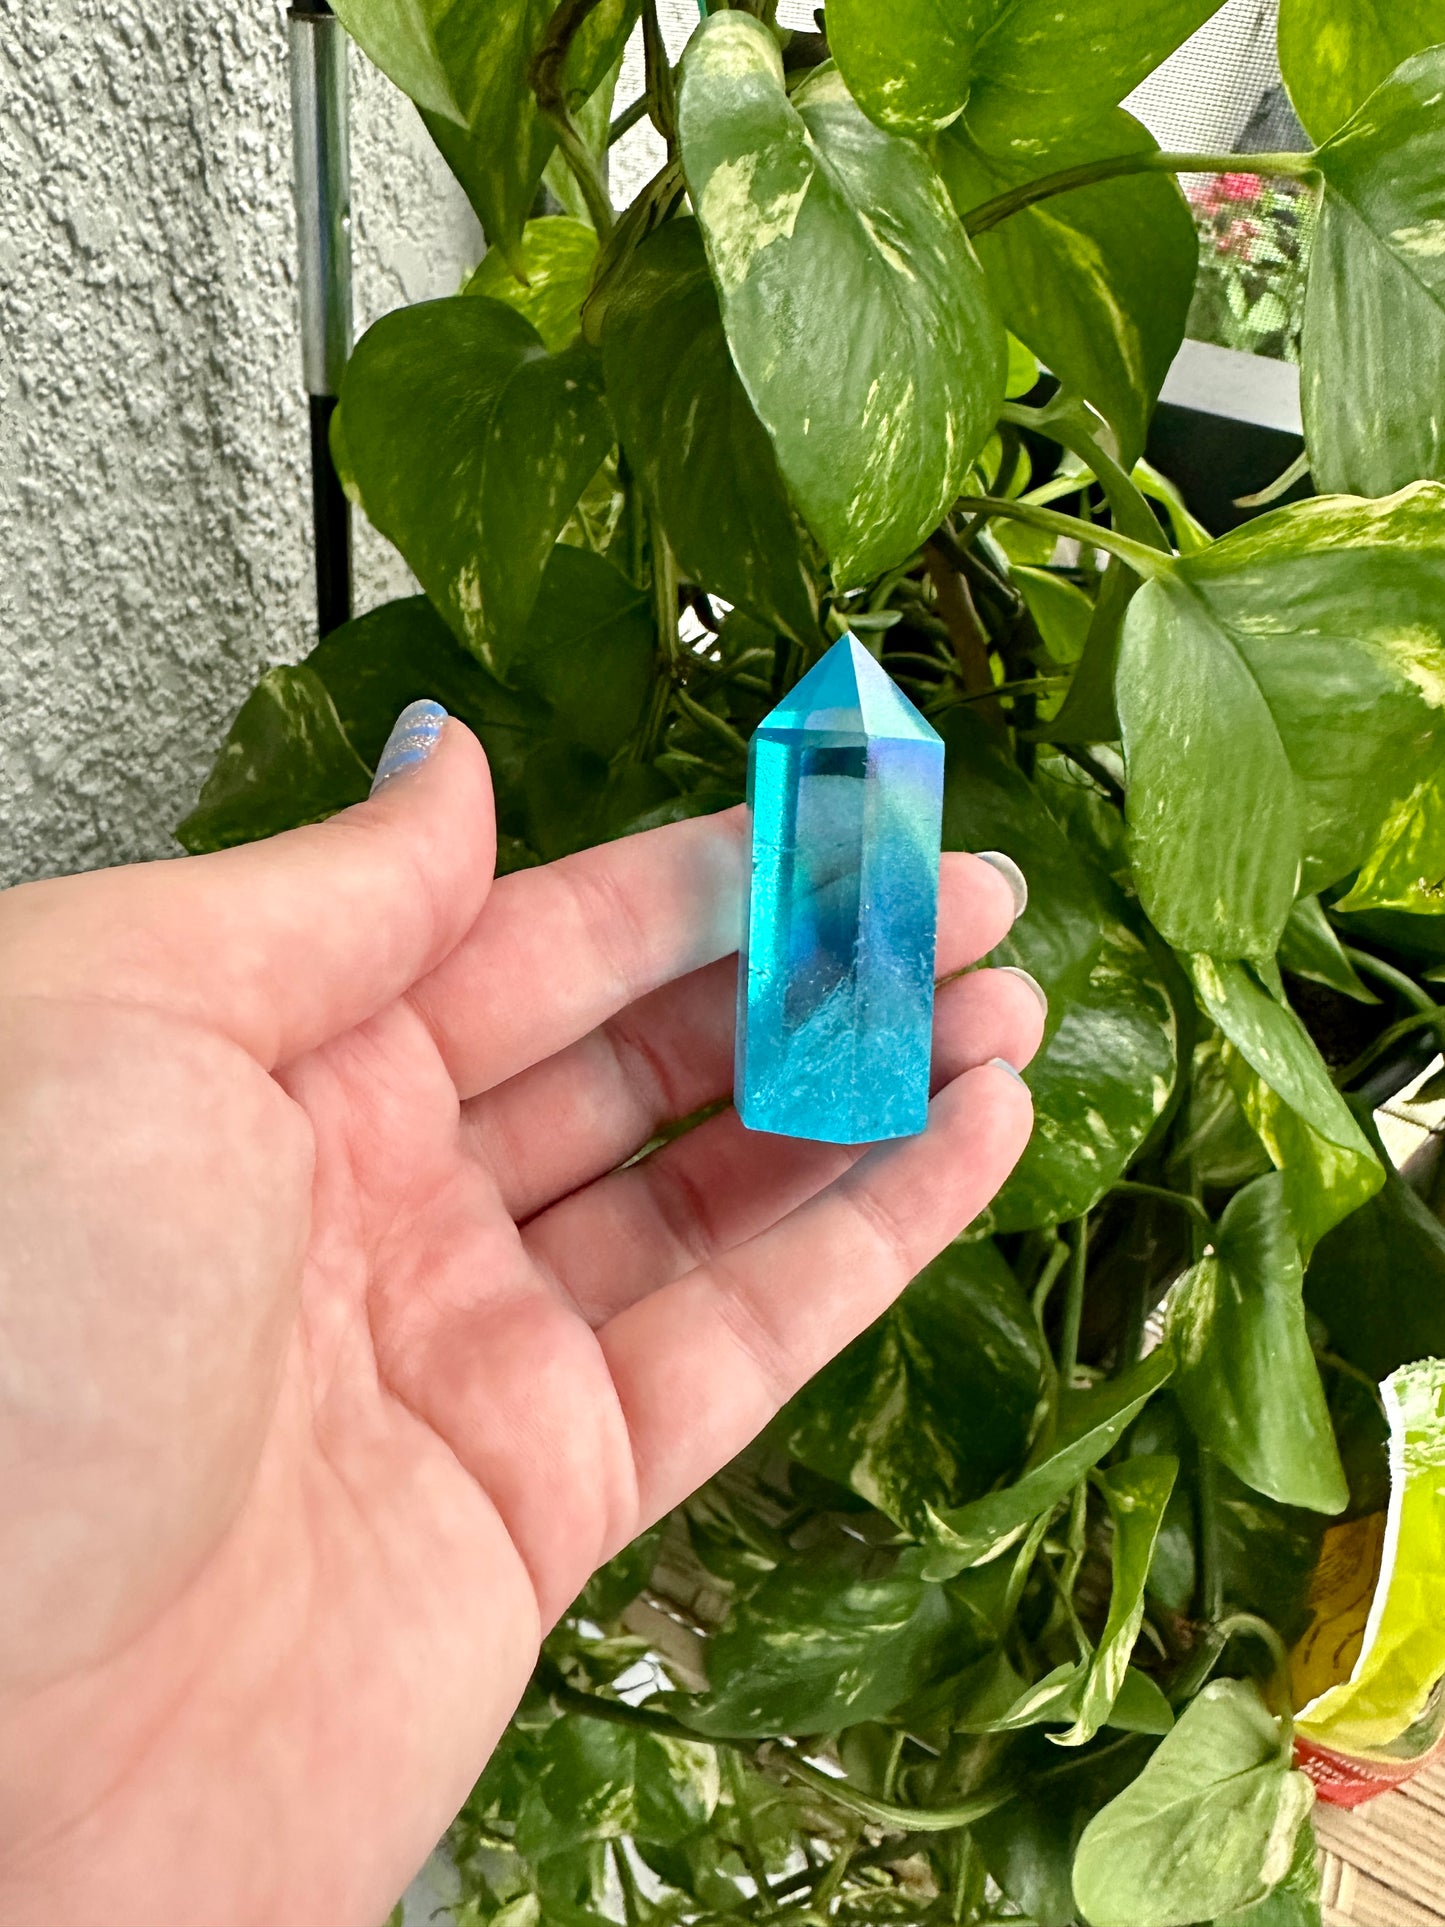 Blue Aura Quartz Tower - Majestic Crystal Point for Clarity & Communication, Handcrafted Gemstone Obelisk, Ethereal Energy Decor Piece